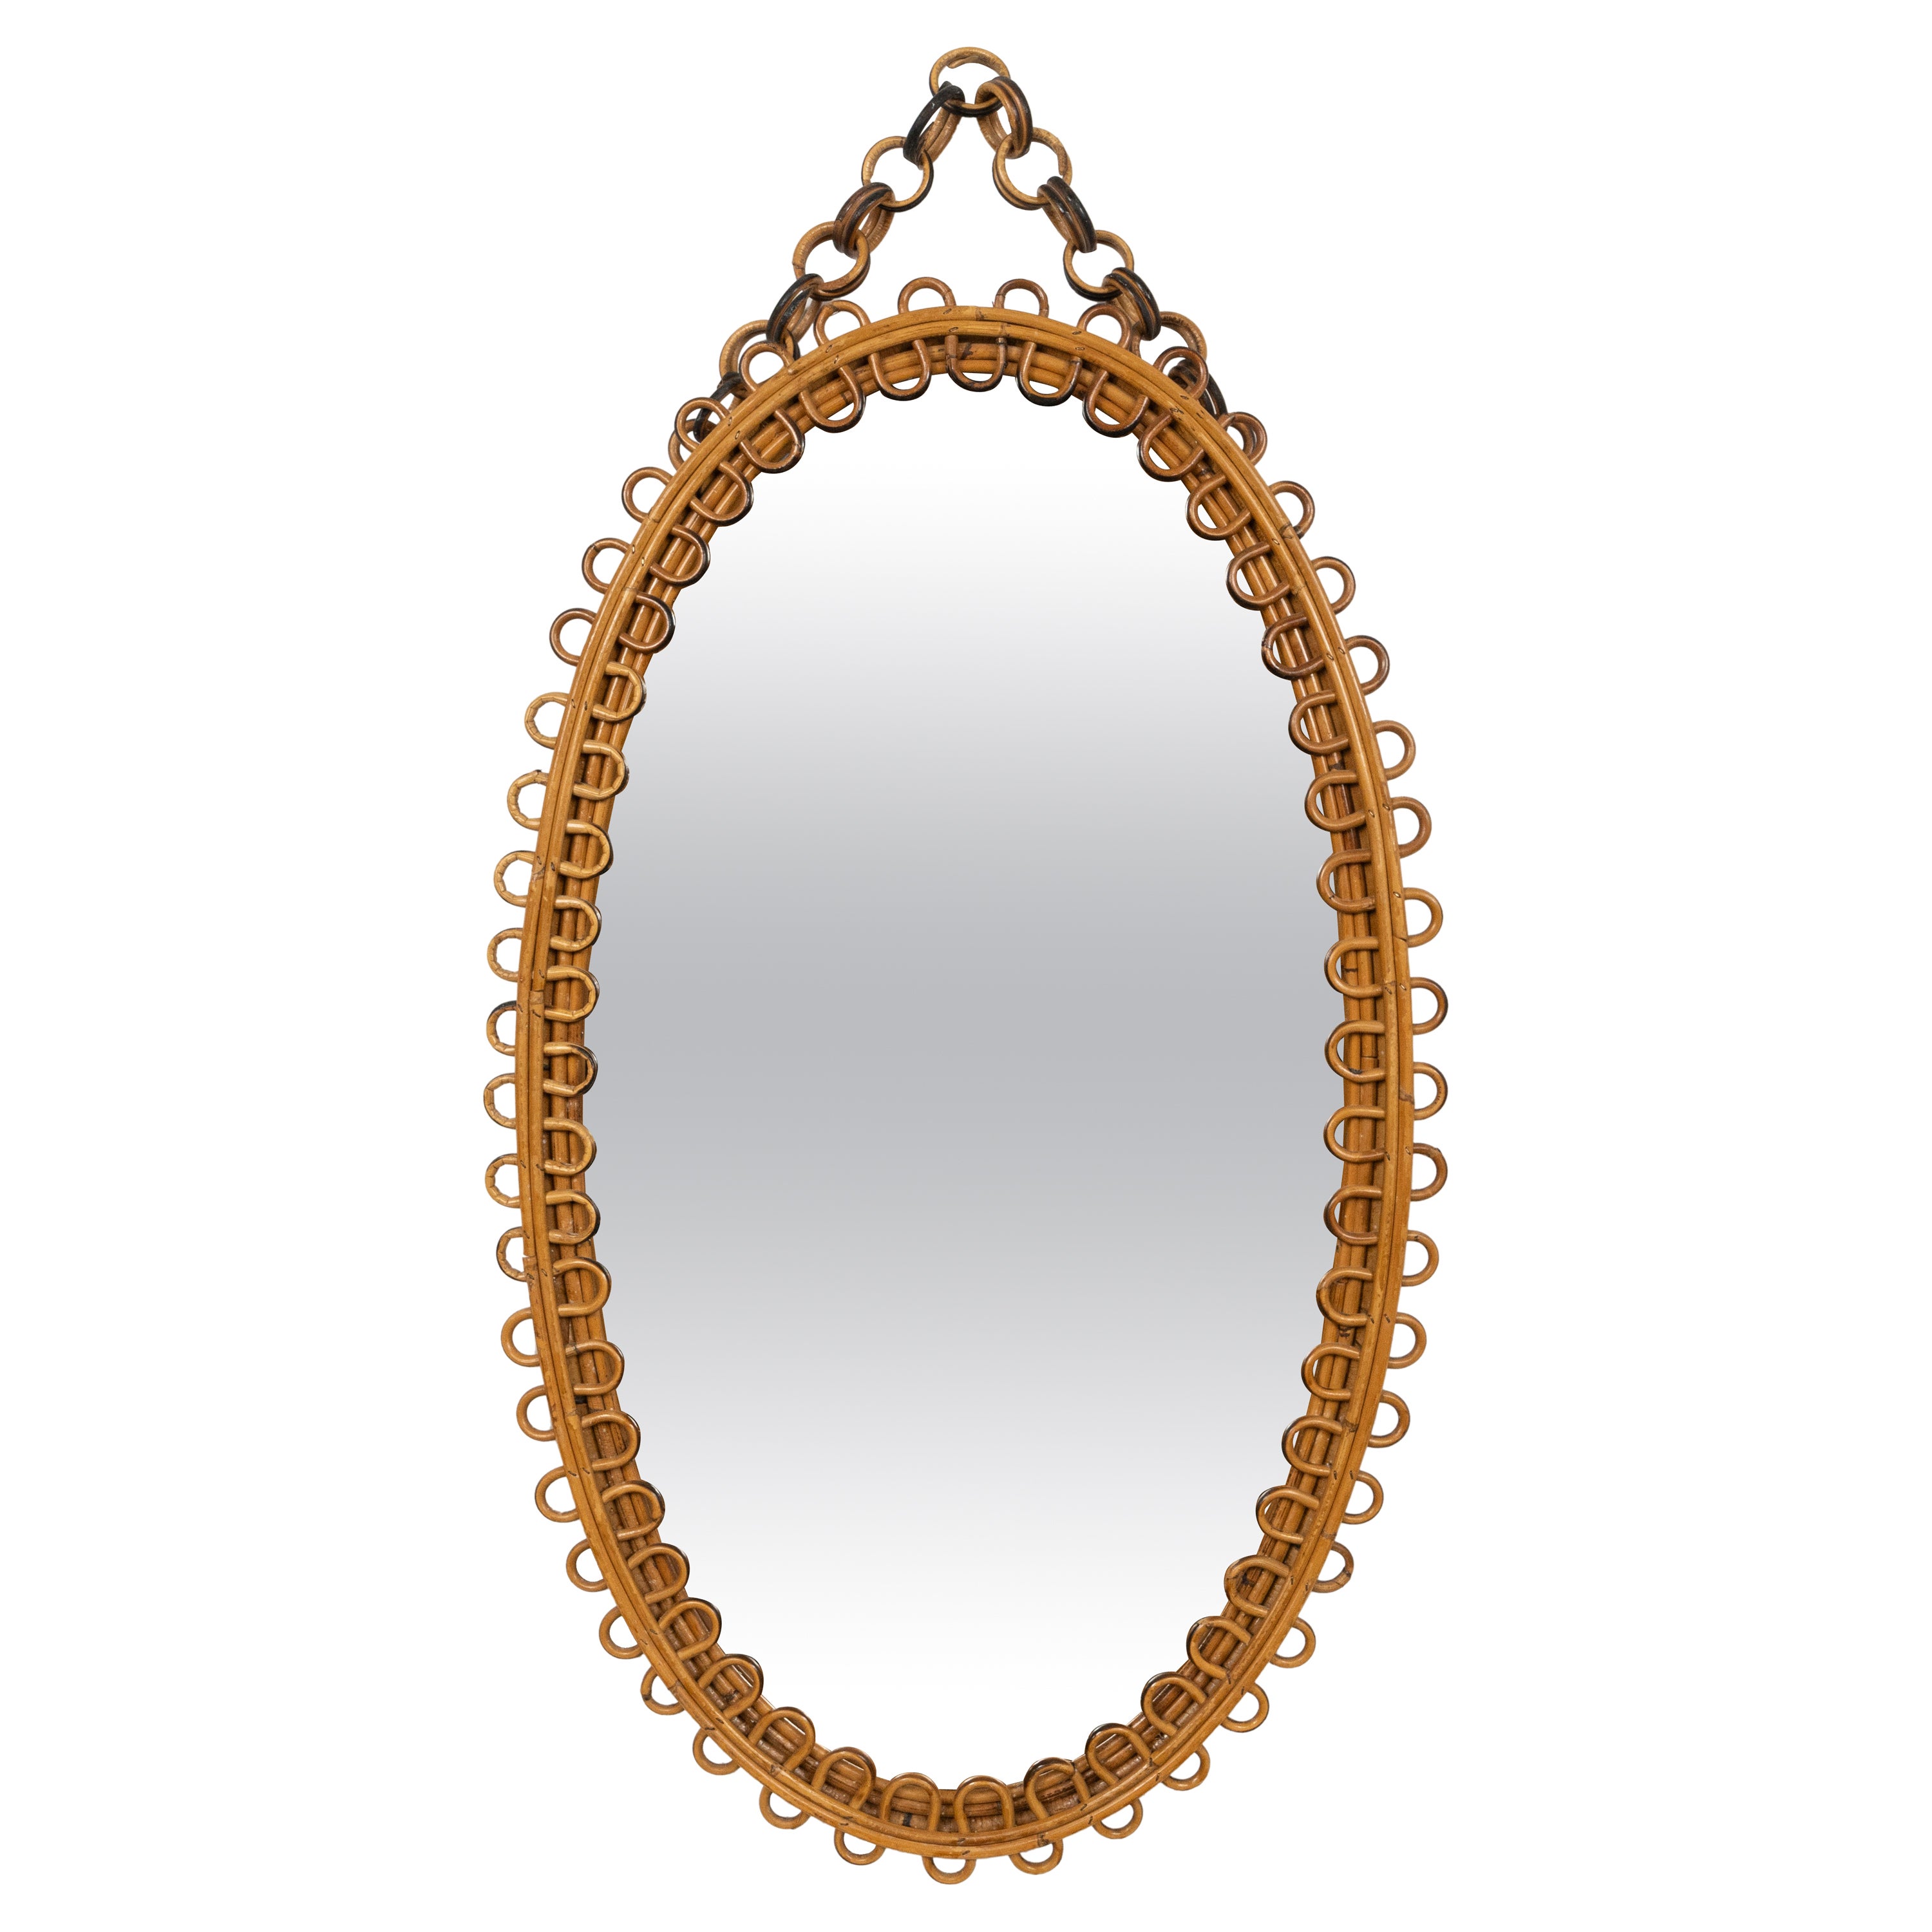 Rattan and Bamboo Oval Wall Mirror with Chain Franco Albini Style, Italy, 1960s